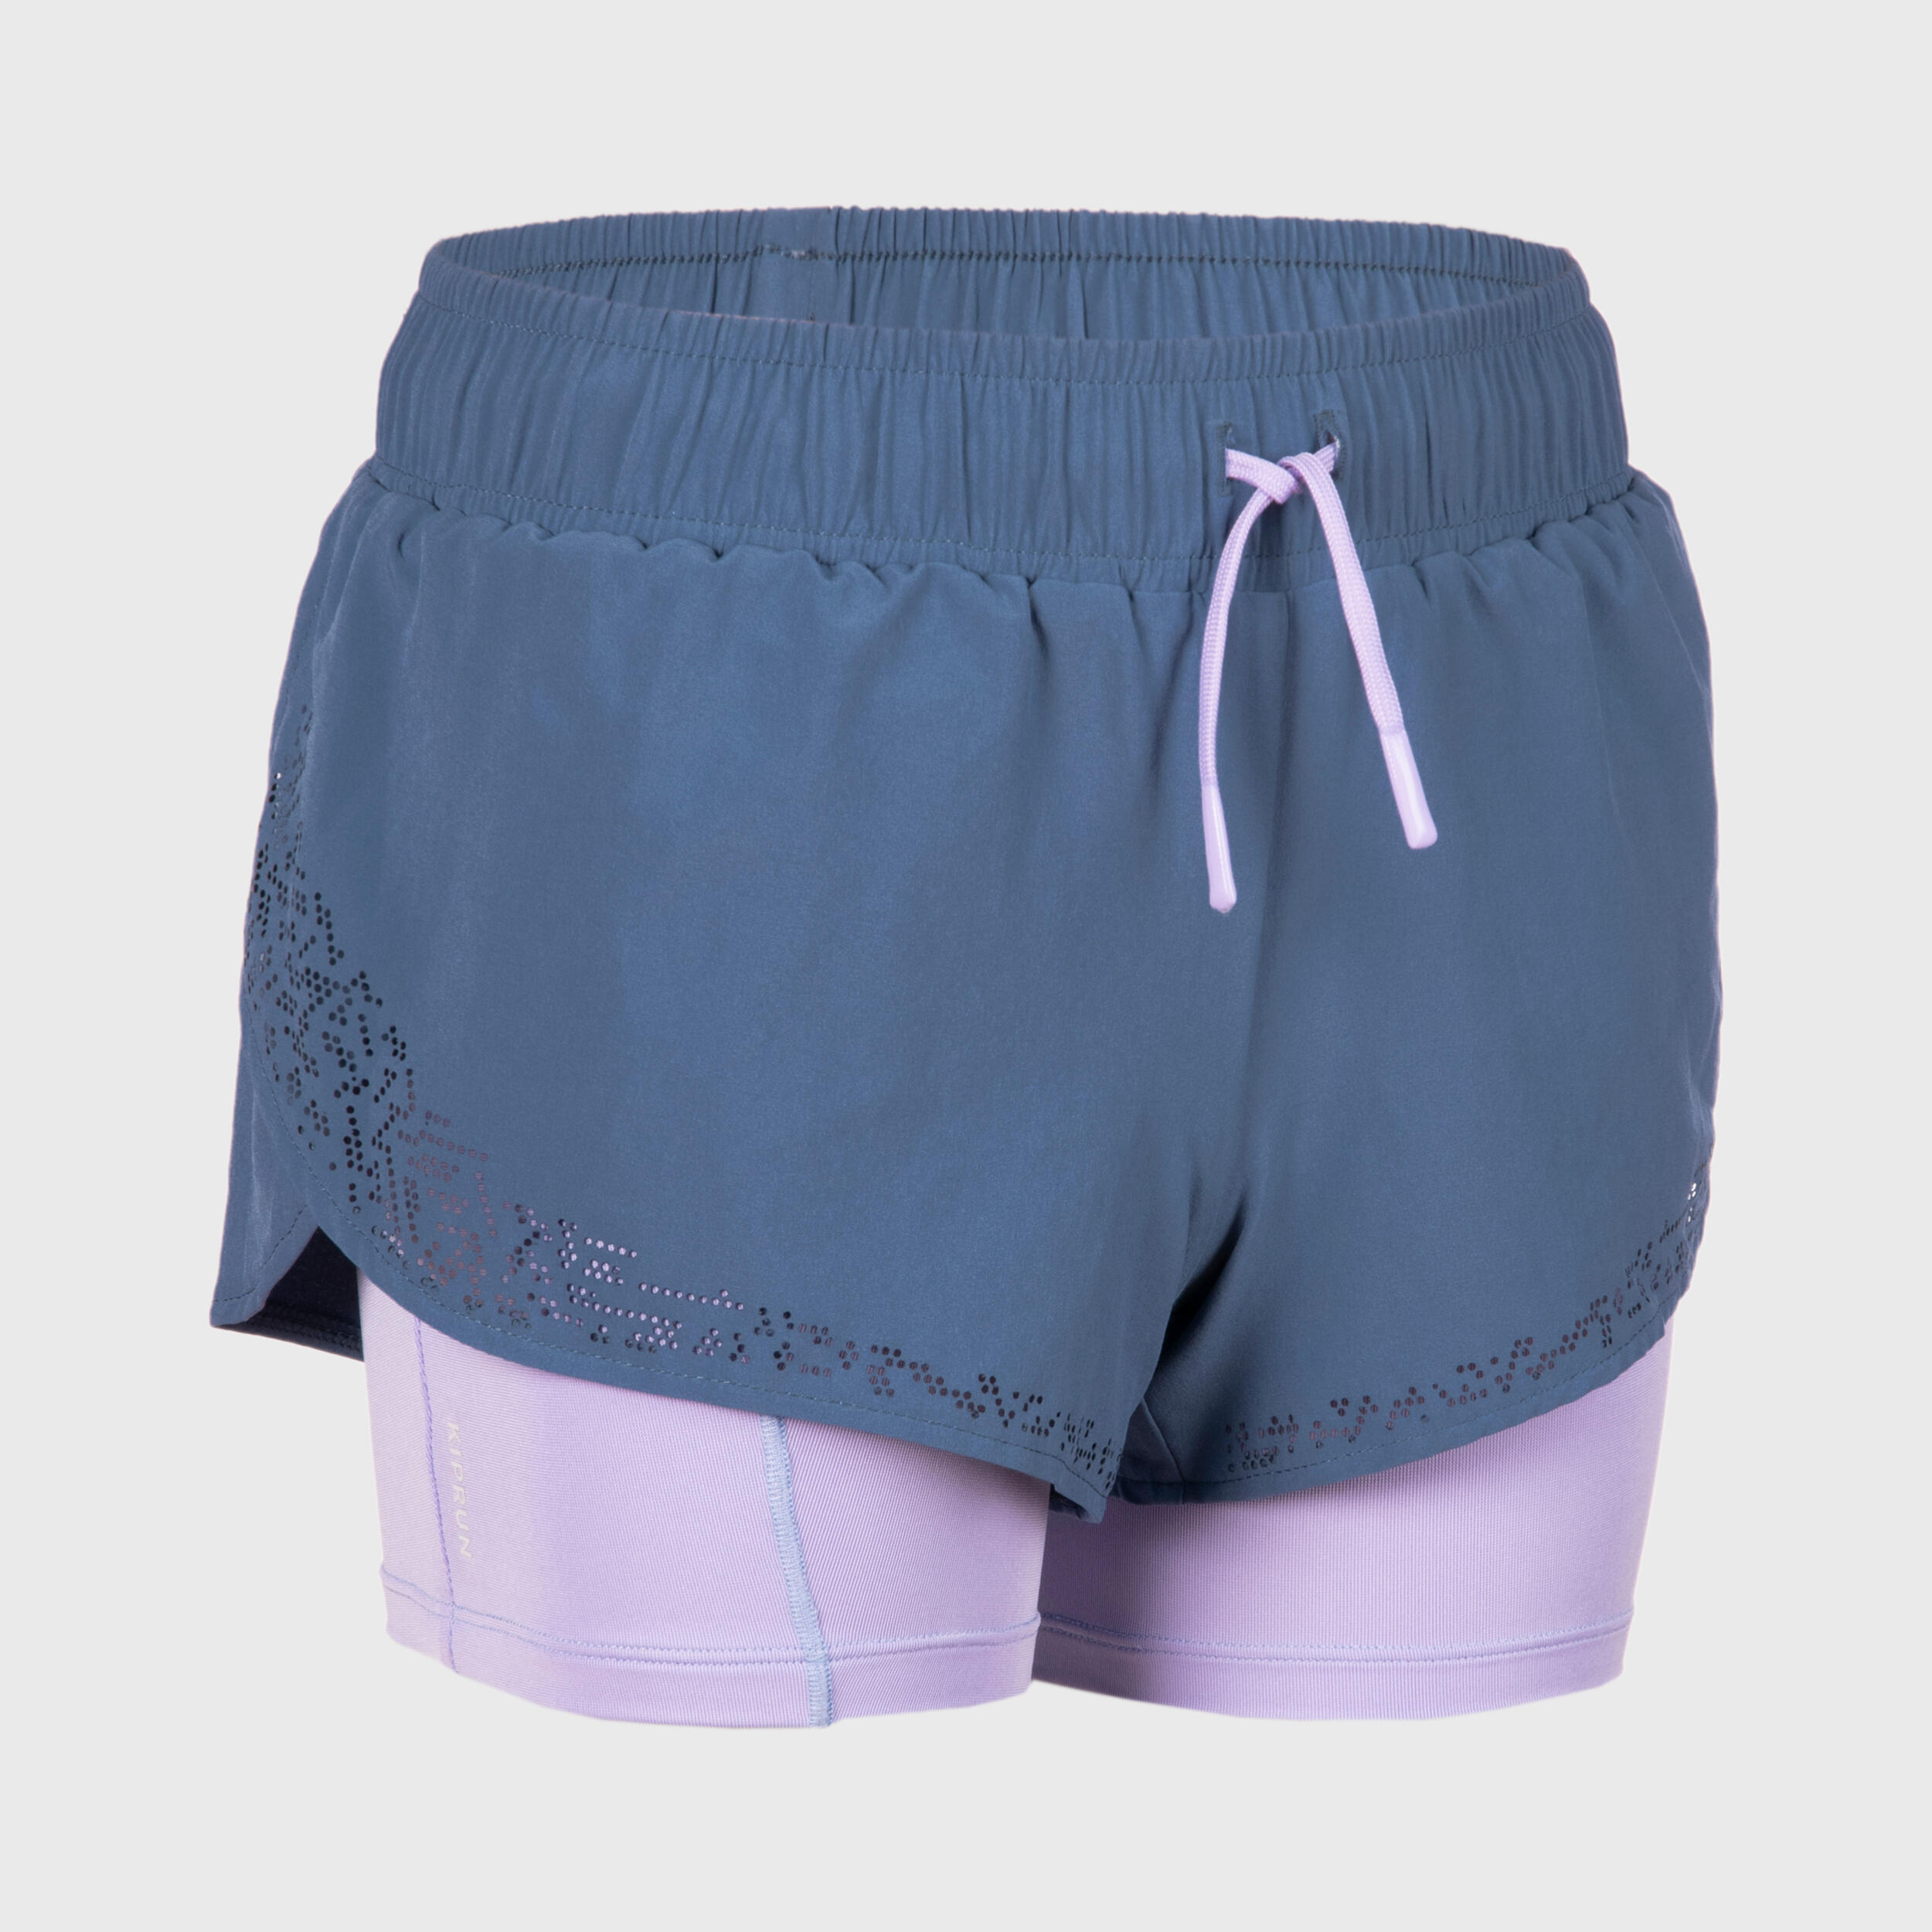 KIPRUN DRY+ girl's breathable 2-in-1 tight running shorts - denim and mauve 6/14